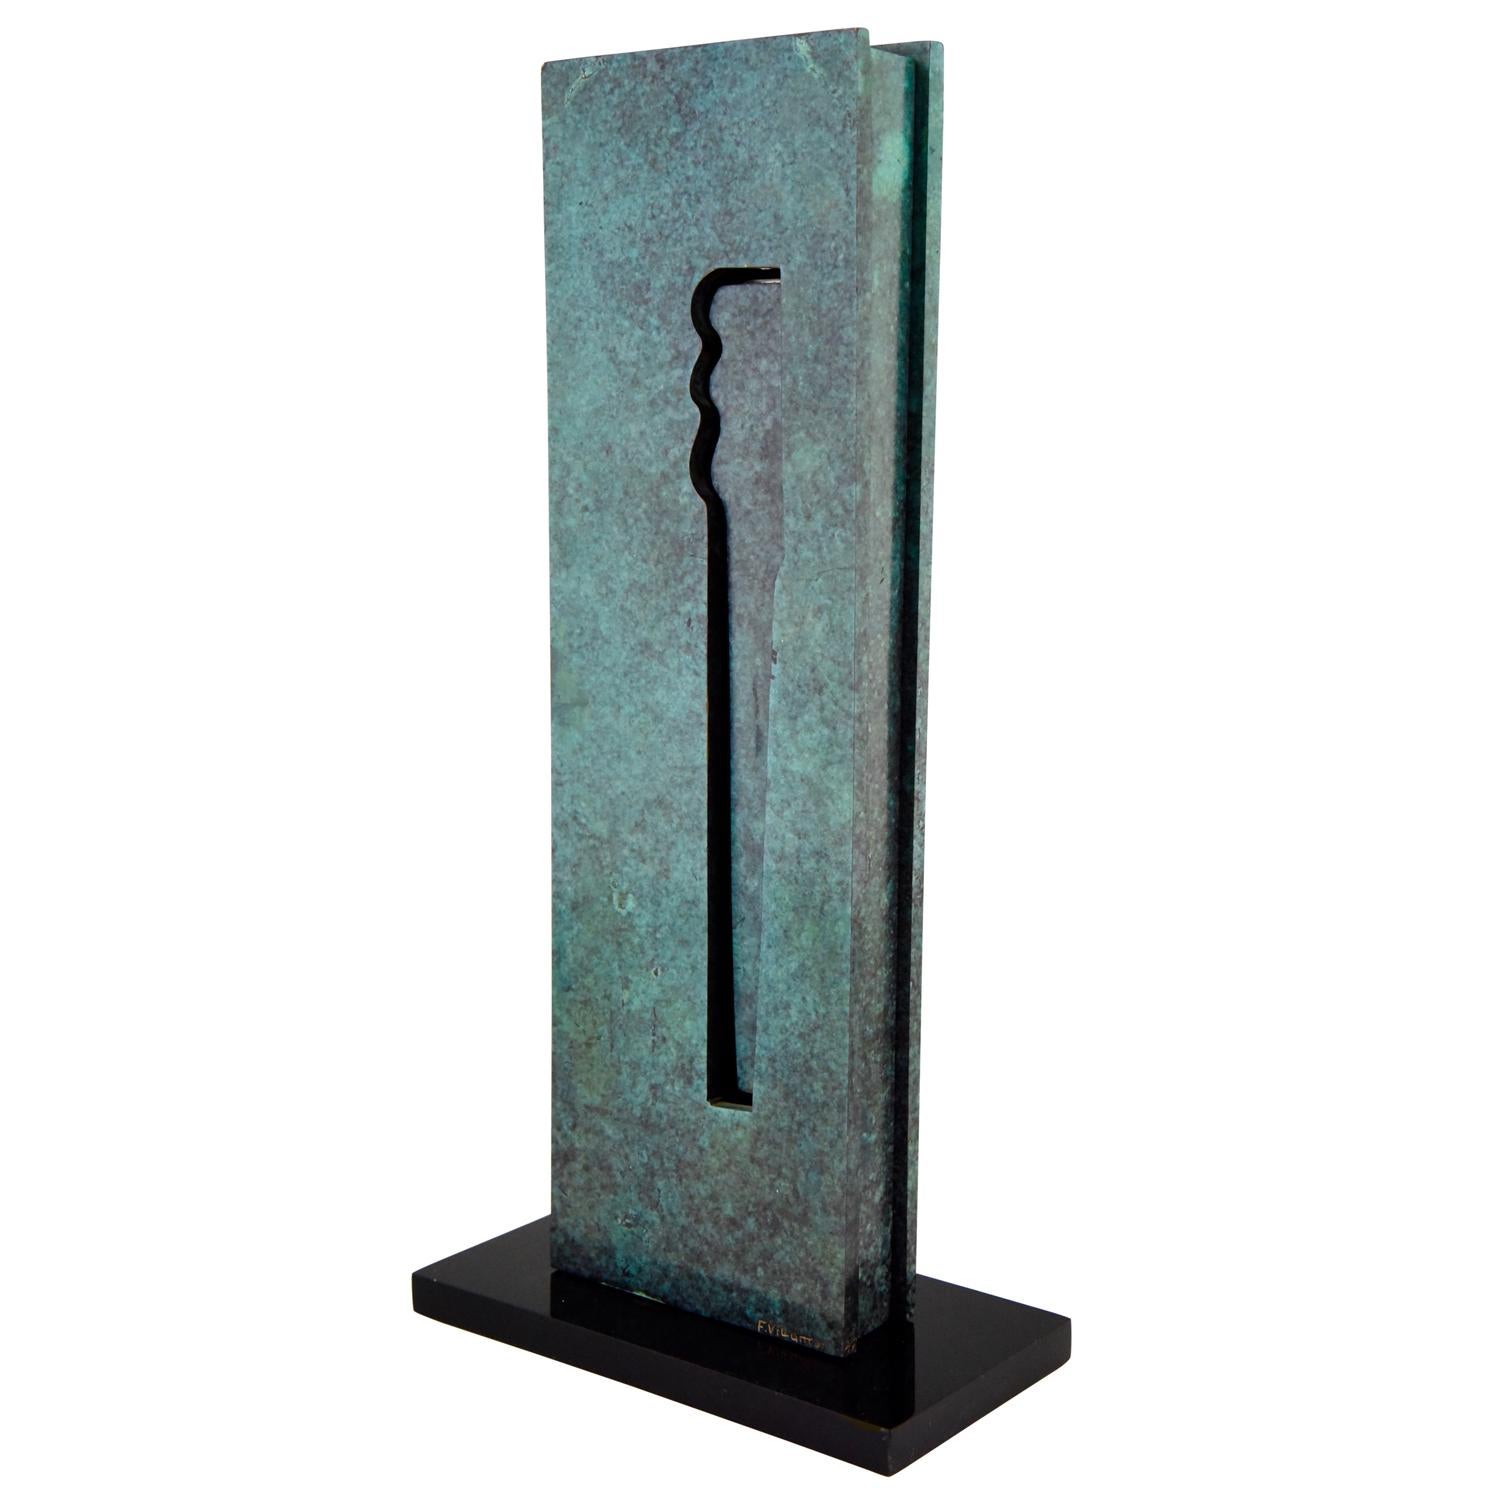 Stylish Mid-Century Modern bronze sculpture by artist Felix Villamor, he was born in Spain in 1940. This artist joined the 